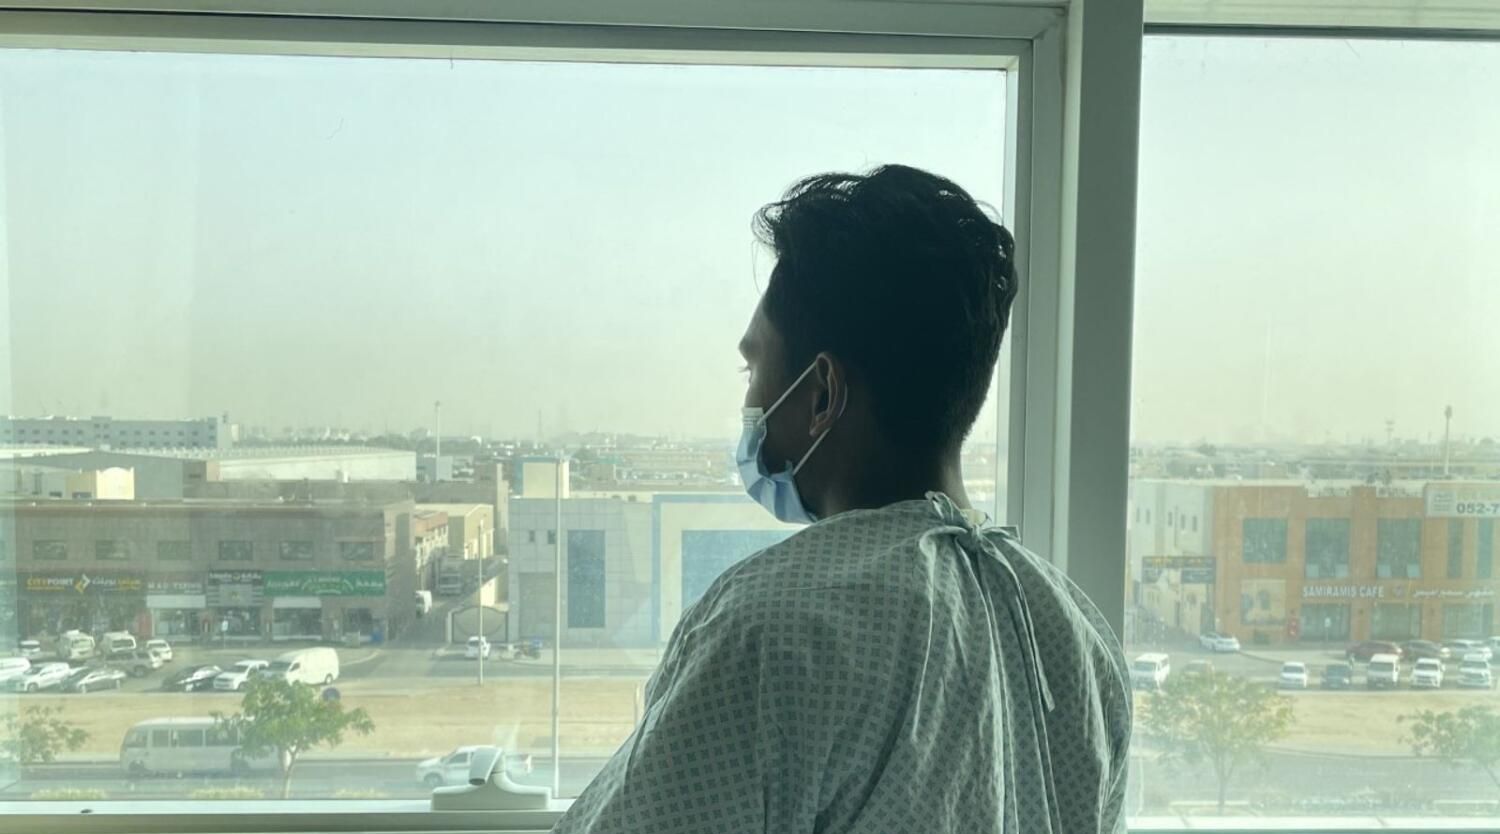 UAE: Pakistani expat diagnosed with active TB after visa medical test